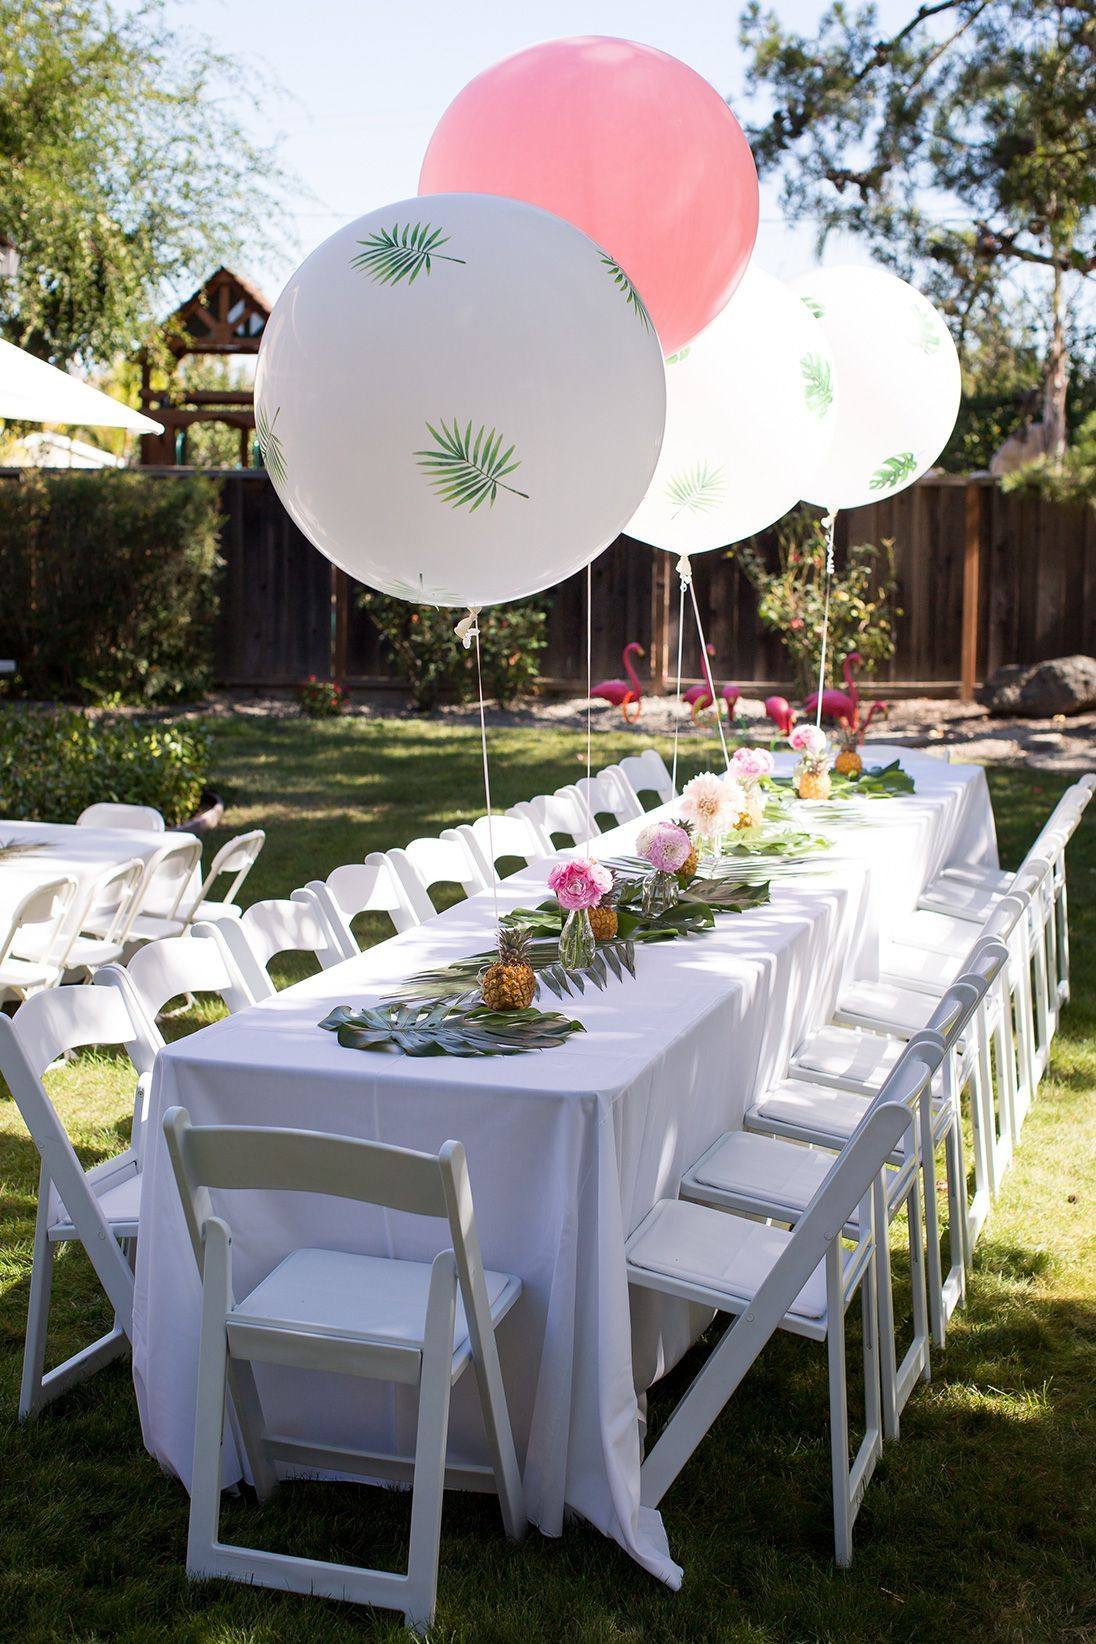 Backyard Retirement Party Ideas
 7 Brilliant Retirement Party Ideas to Jazz up Your Get